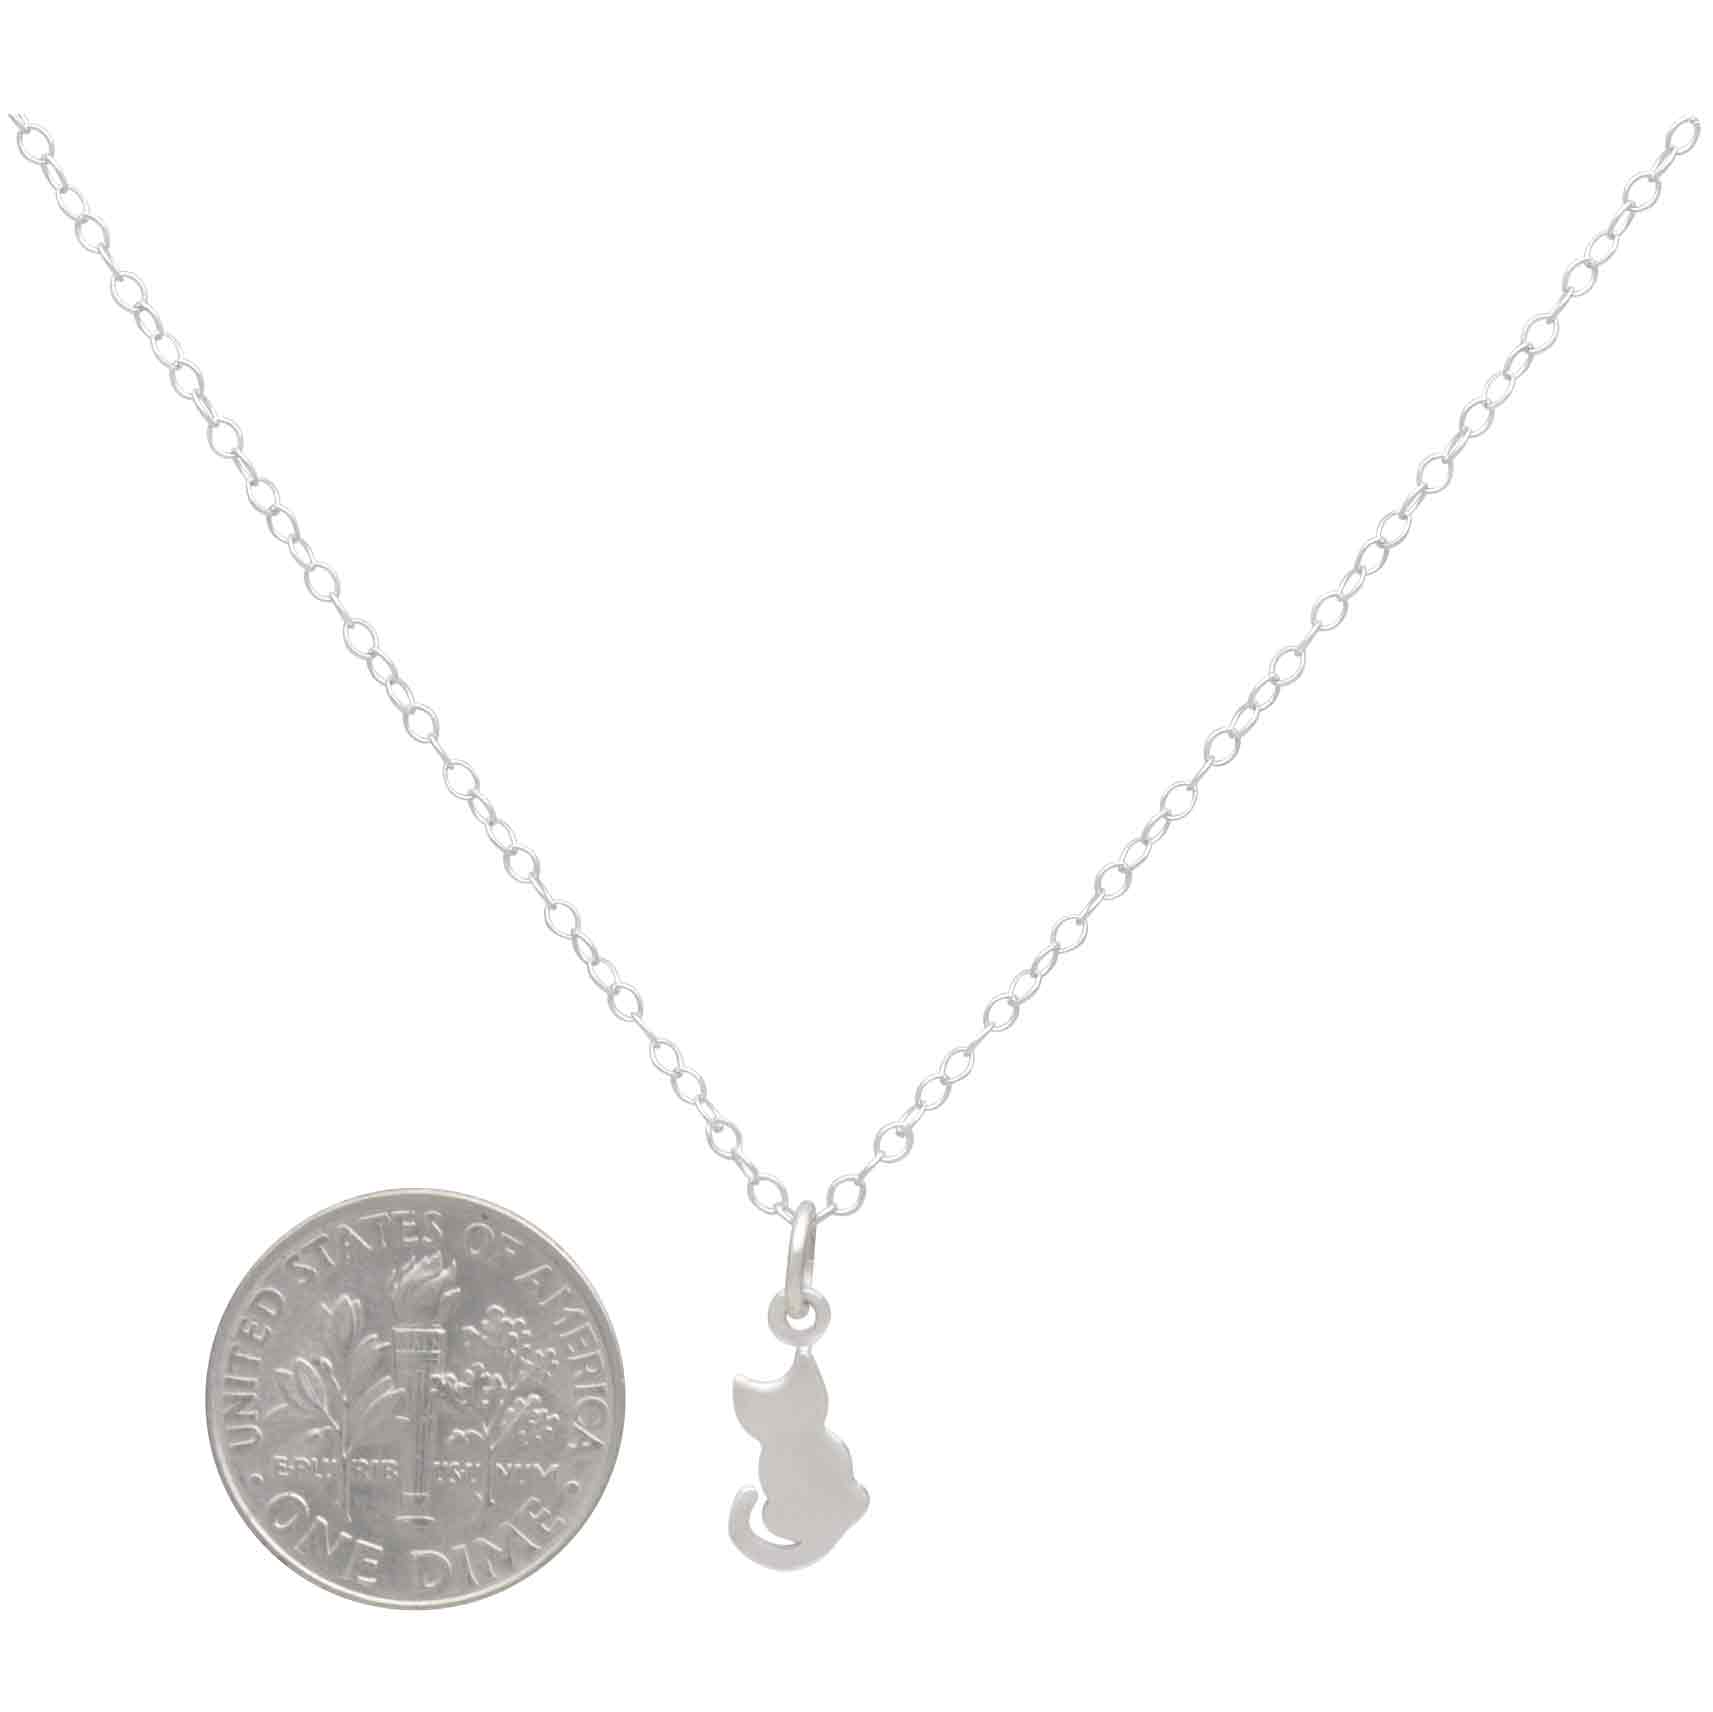 This sterling silver tiny cat charm necklace is a universal visual of a cat sitting patiently, just watching the world go by. We love her because she teaches us the joy of missing out, appreciating the little things, and of letting go of all our worry. While this tiny cat charm necklace is perfect for Youth and Jr Jewelry Lines, they'll also put a smile on cat lover's of all ages.